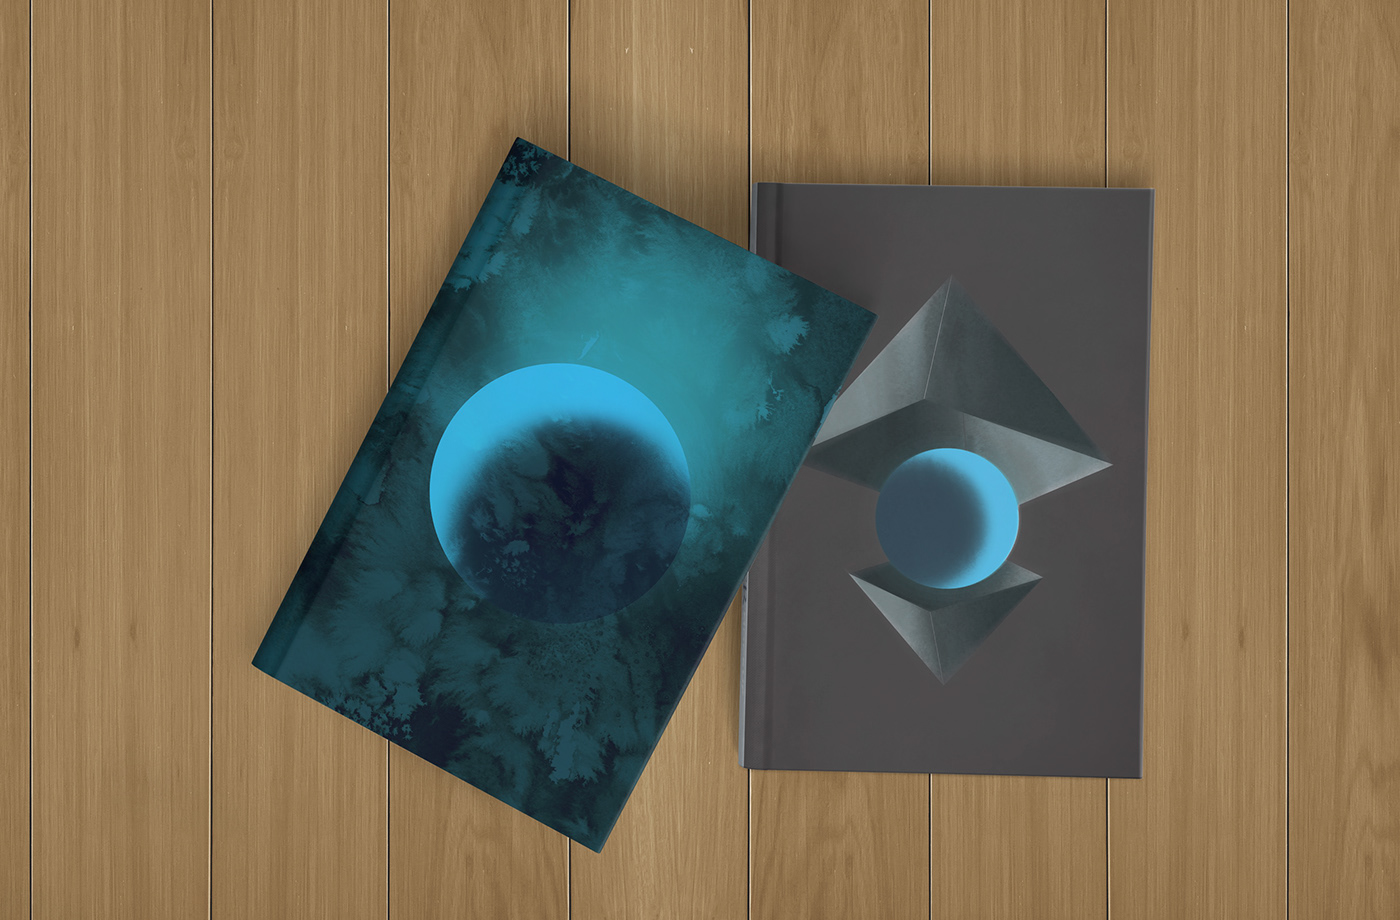 solid geometry poster afiche cover libro book shape hollow platonic